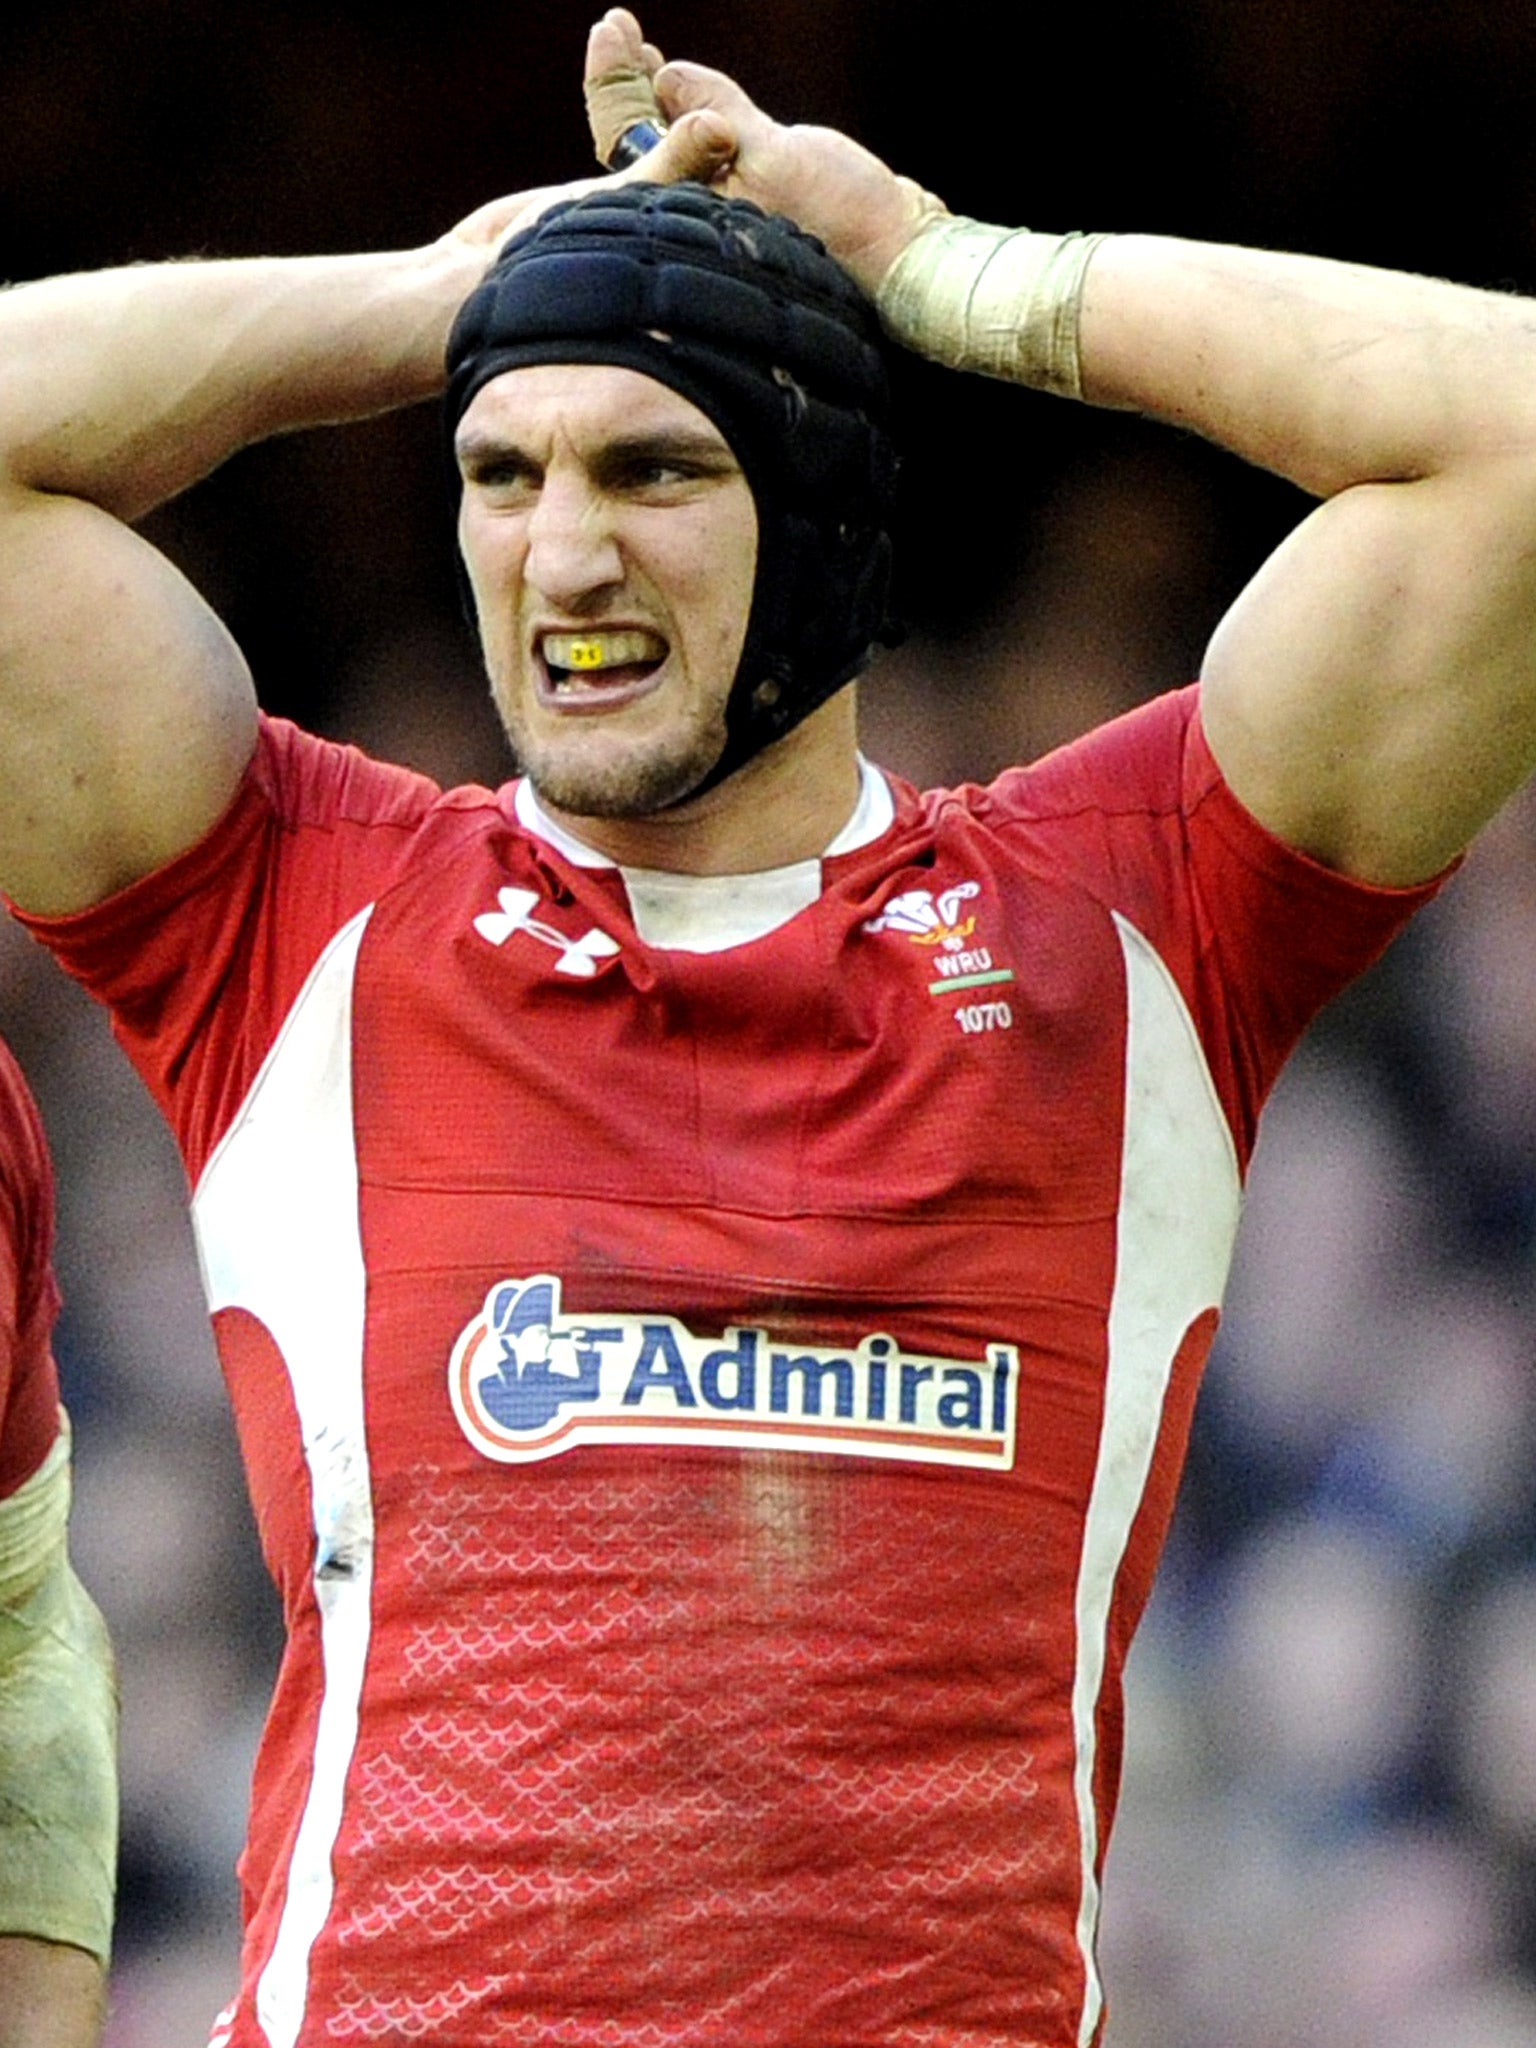 Sam Warburton will not start for Wales against Italy even if he recovers from shoulder injury